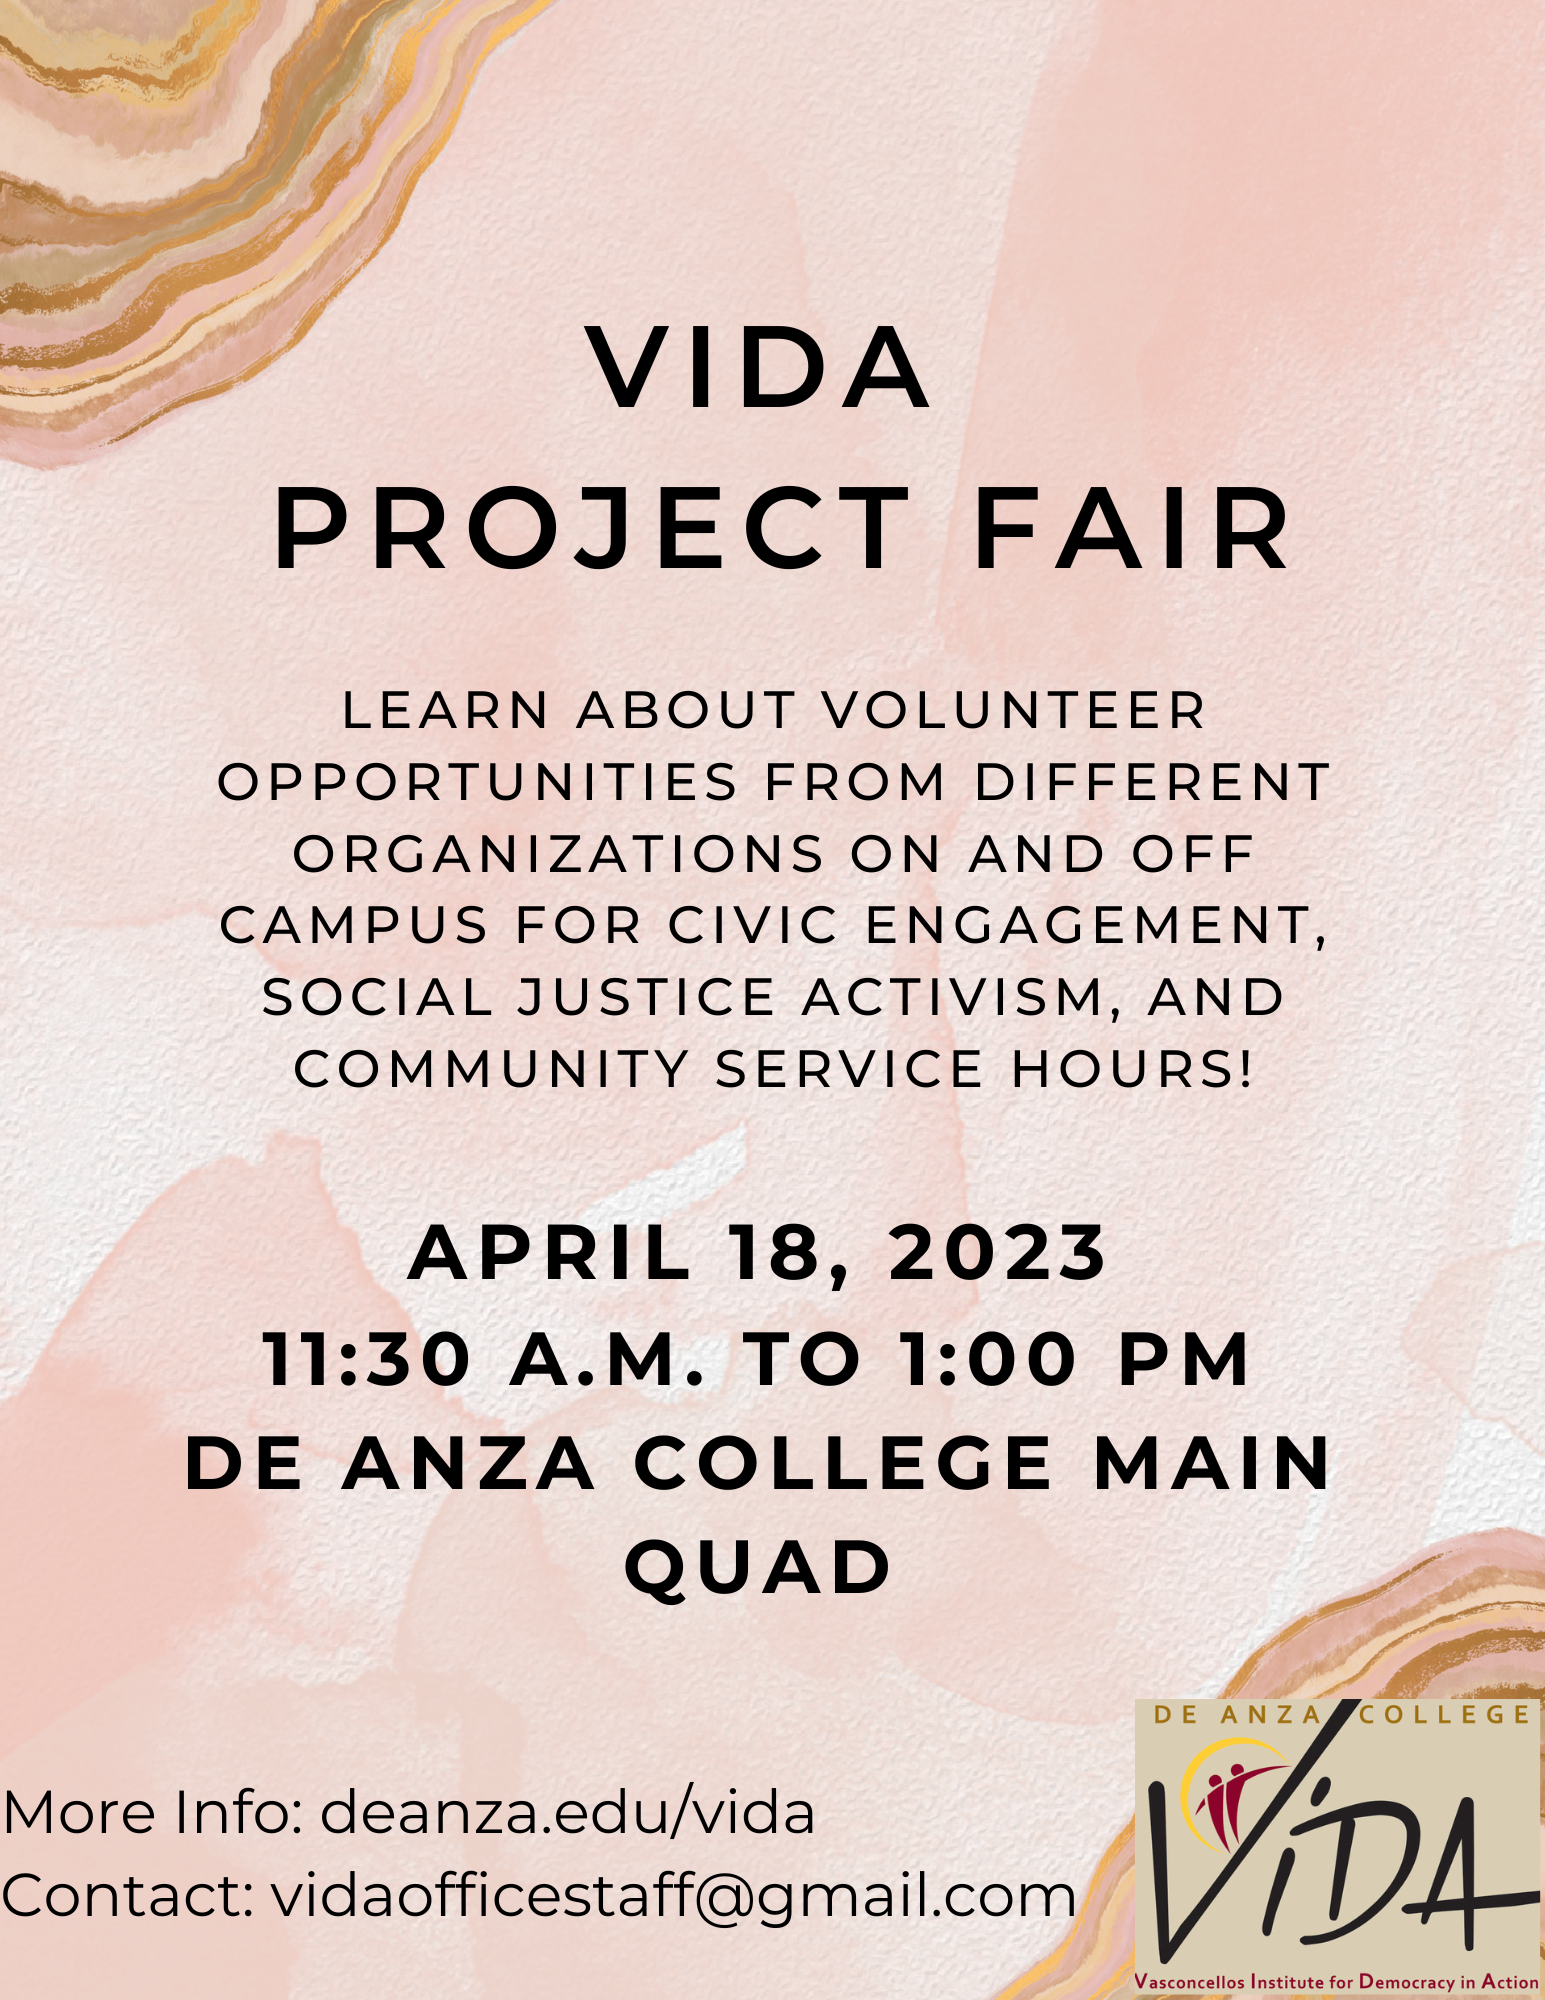 VIDA PROJECT FAIR LEARN ABOUT VOLUNTEER OPPORTUNITIES FROM DIFFERENT ORGANIZATIONS ON AND OFF CAMPUS FOR CIVIC ENGAGEMENT, SOCIAL JUSTICE ACTIVISM. AND COMMUNITY SERVICE HOURS! APRIL 18, 2023 11:30 A.M. TO 1:00 PM DE ANZA COLLEGE MAIN QUAD More Info: deanza.edu/vida Contact: vidaofficestaff@gmail.com